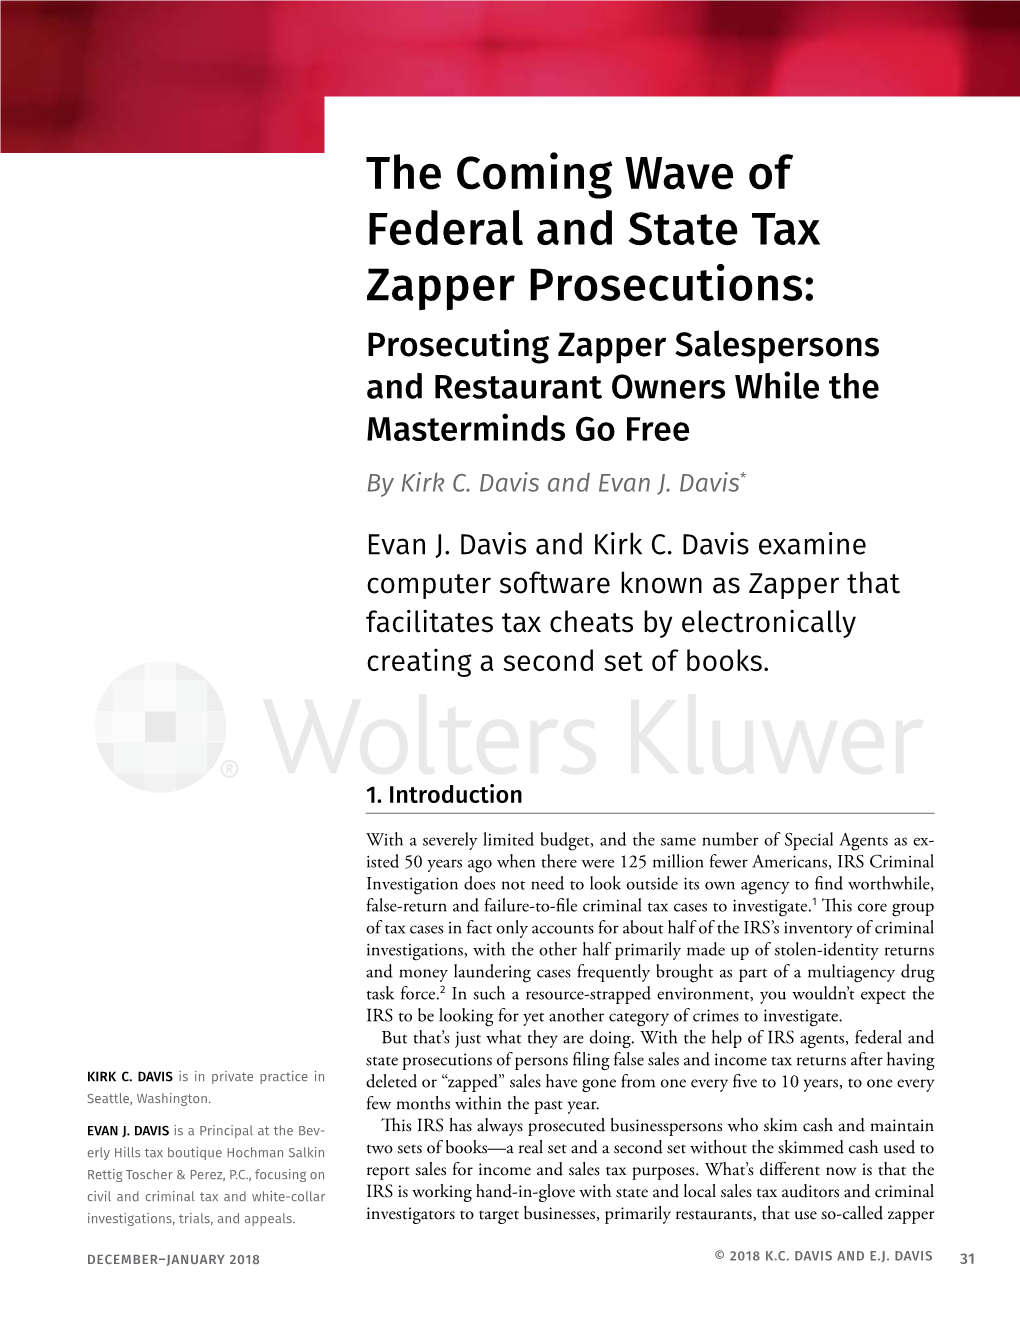 The Coming Wave of Federal and State Tax Zapper Prosecutions: Prosecuting Zapper Salespersons and Restaurant Owners While the Masterminds Go Free by Kirk C